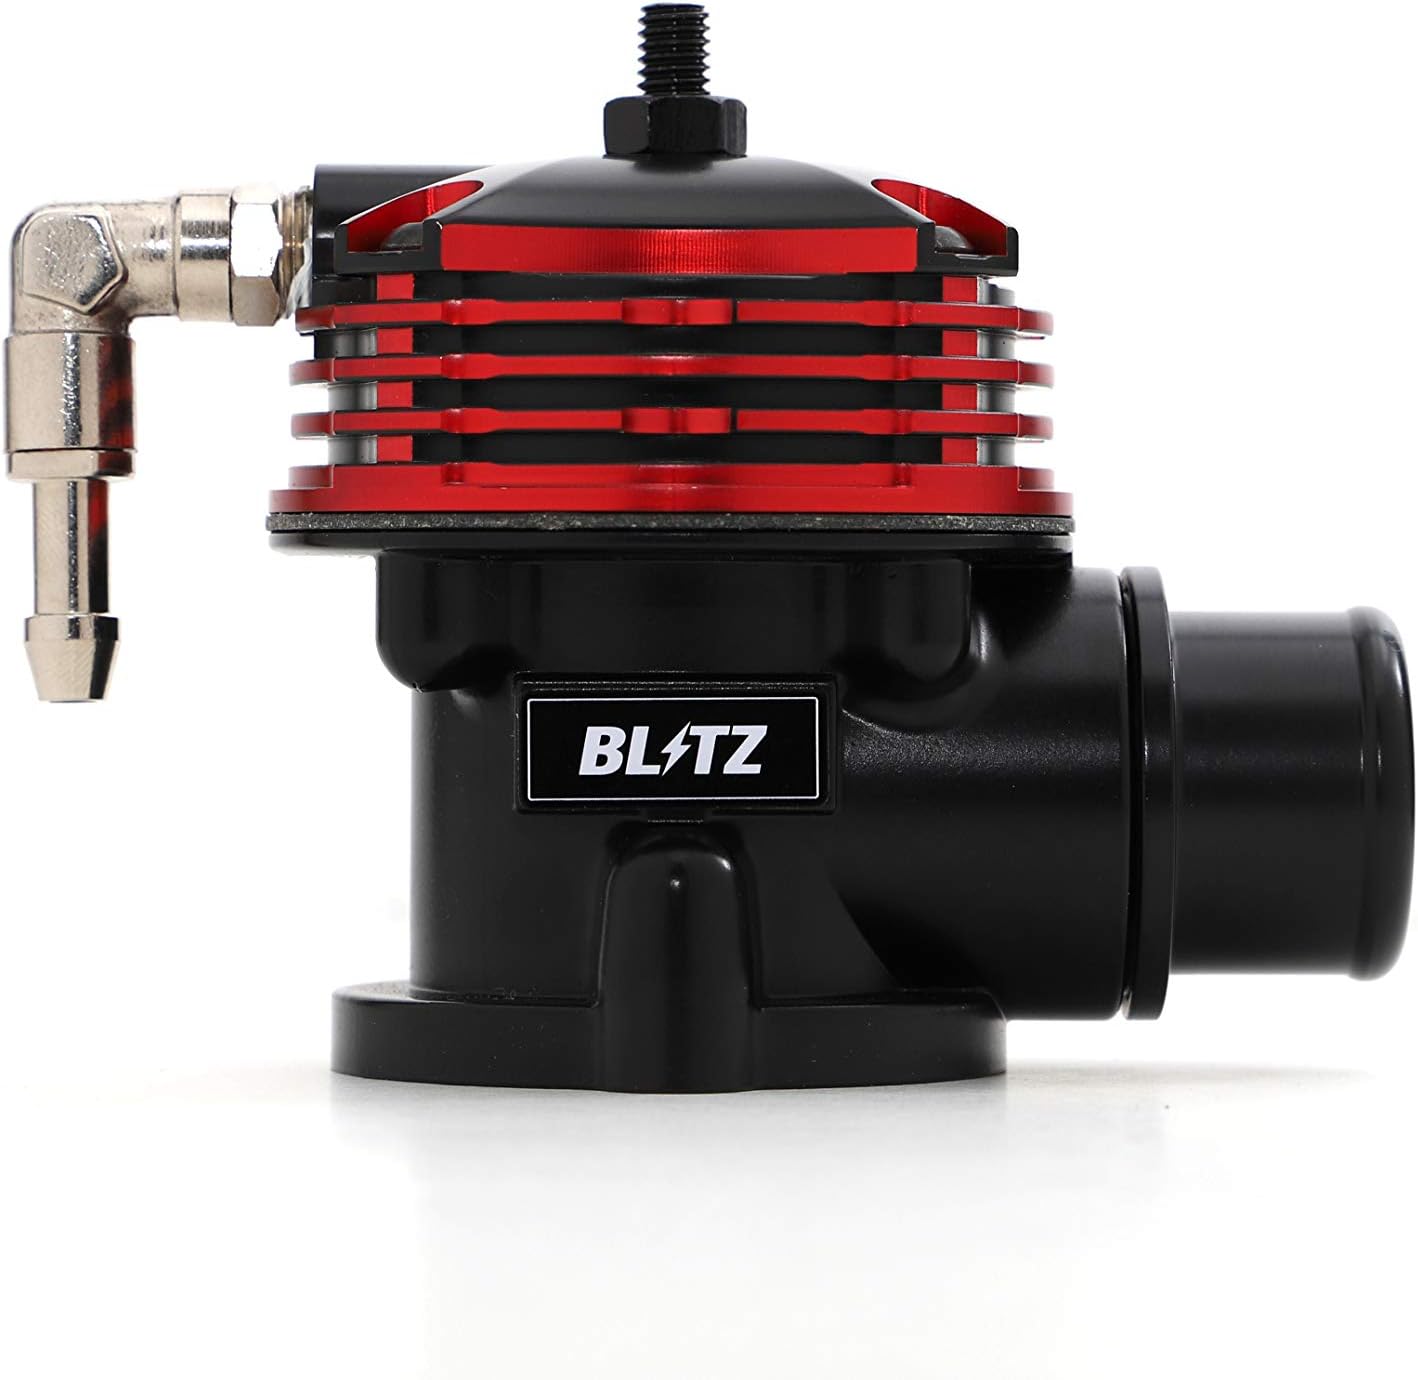 Blitz (Blitz) SUPER SOUND BLOW OFF VALVE BR Return Type (For Vehicle  Inspection) Skyline/Stagea R32/R33/R34 Series RB20/RB25 Dedicated 70720  Discovery Japan Mall